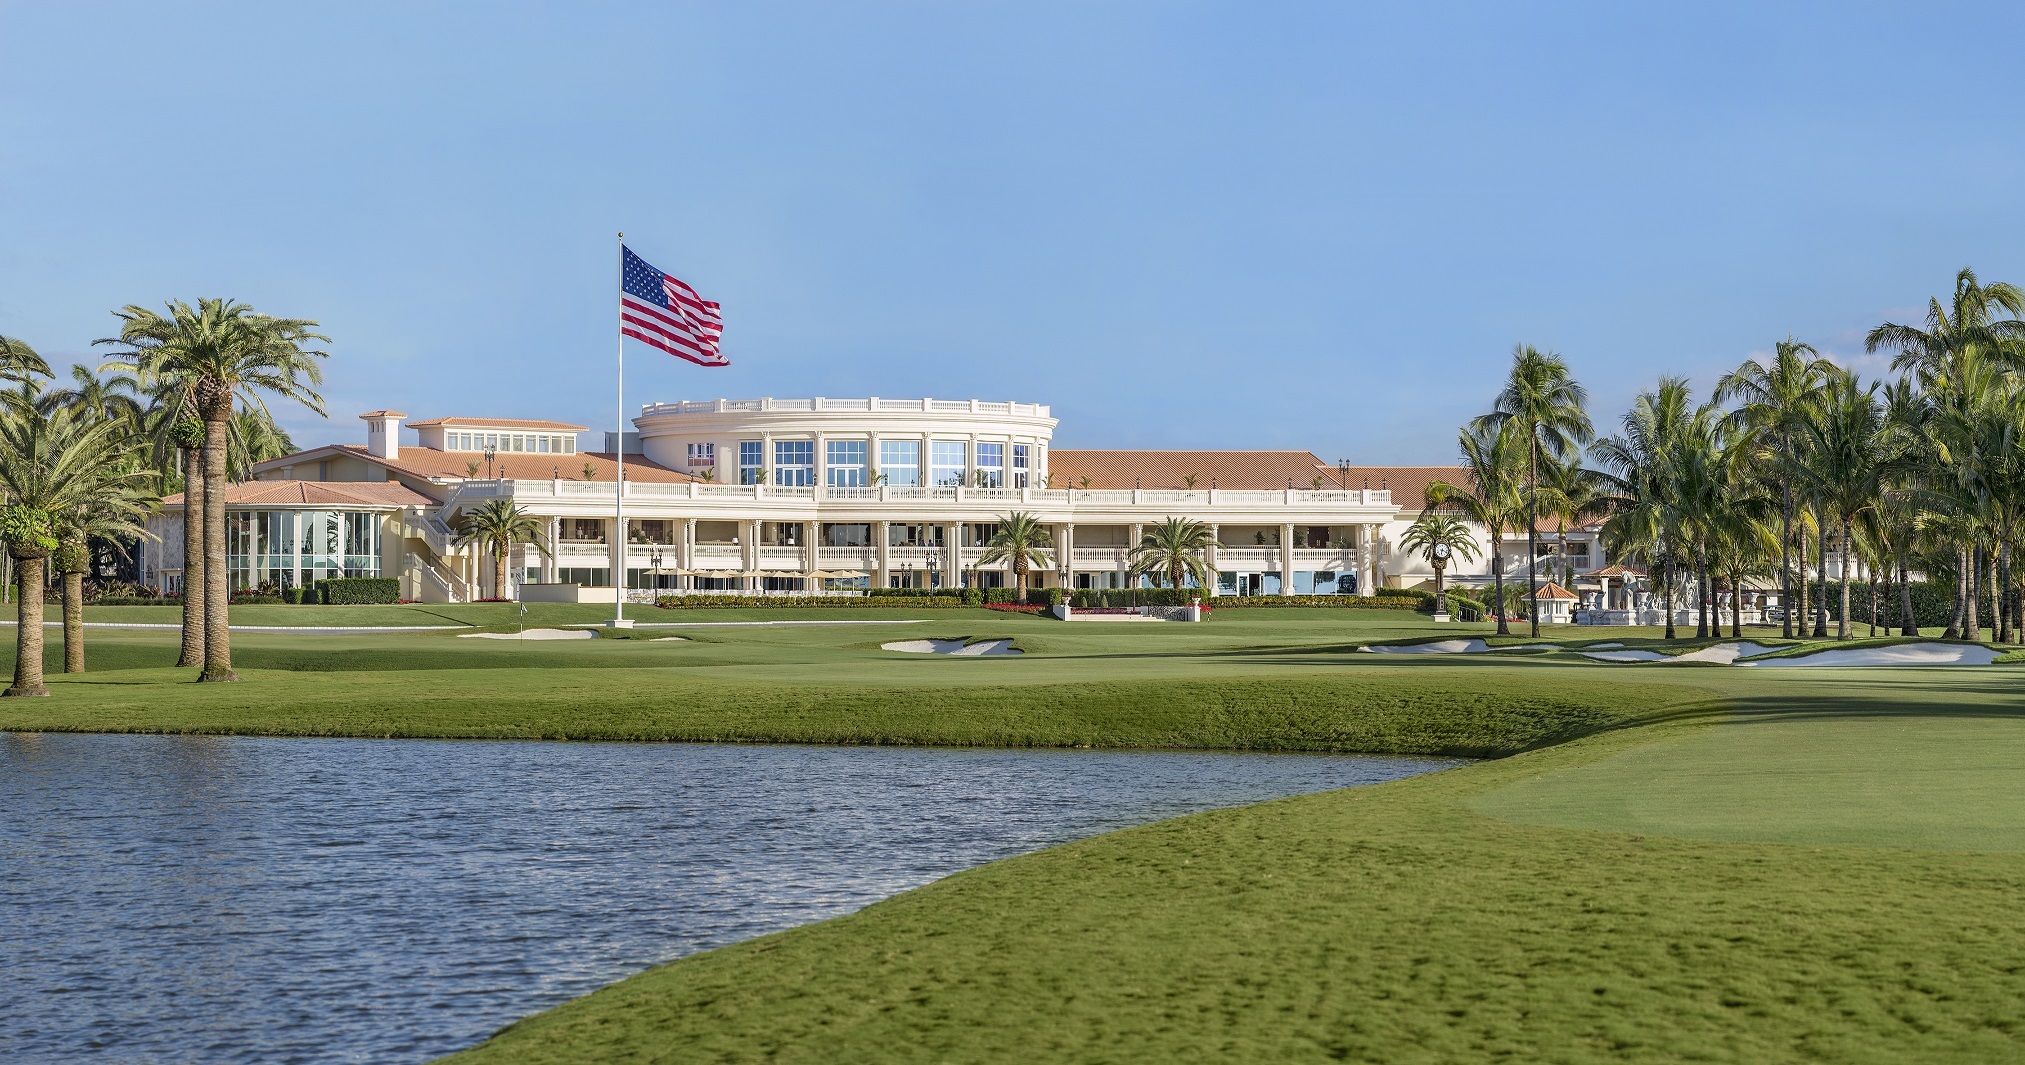 Golf Vacation Package - Summer Swing Deal at Doral: Blue Monster Stay & Play + FREE REPLAYS from $297 per day!